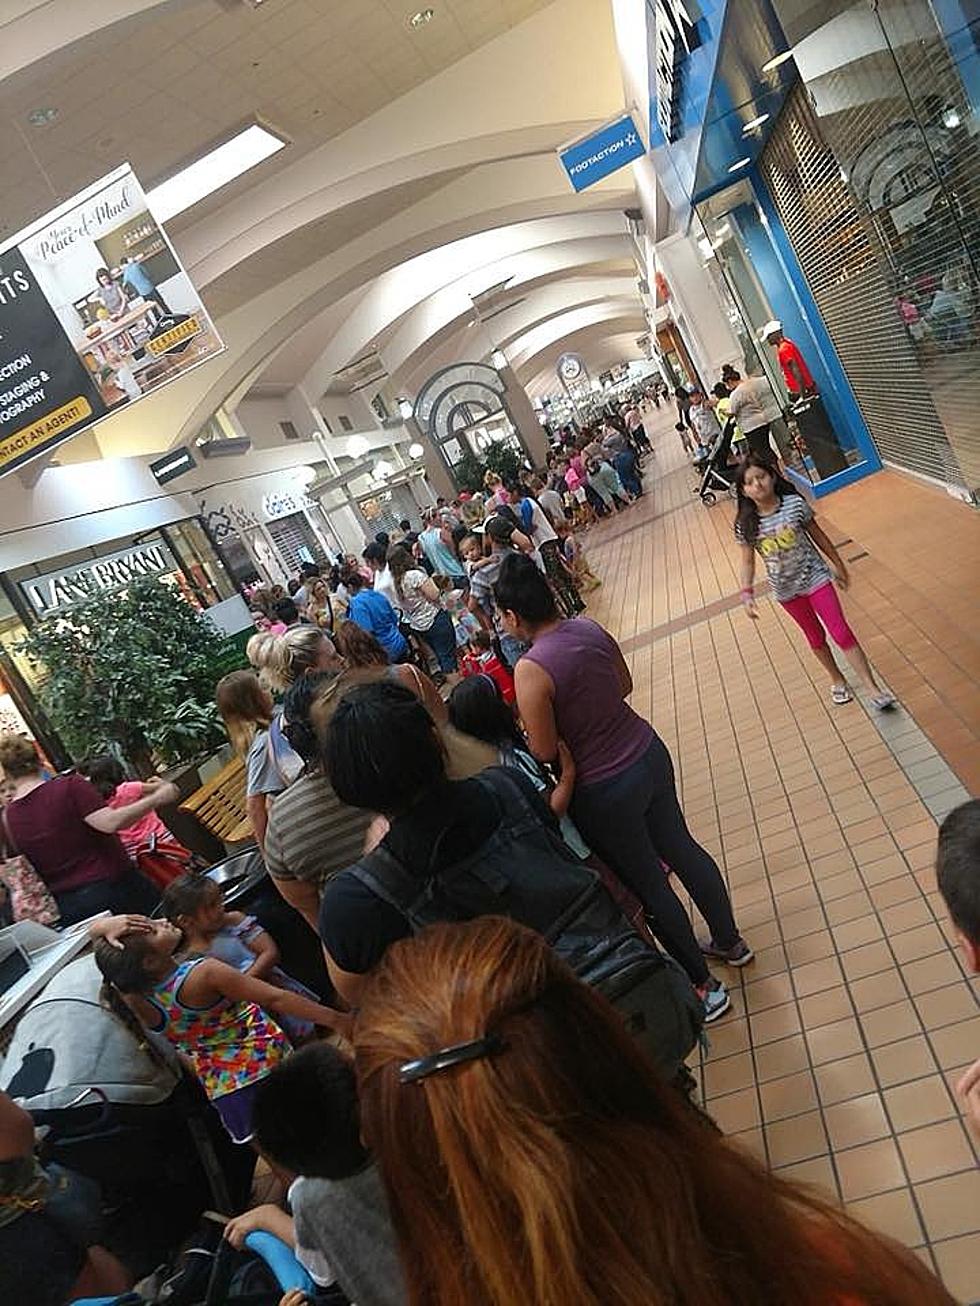 Thinking of Going to Build-A-Bear Today? Get Ready to Wait!